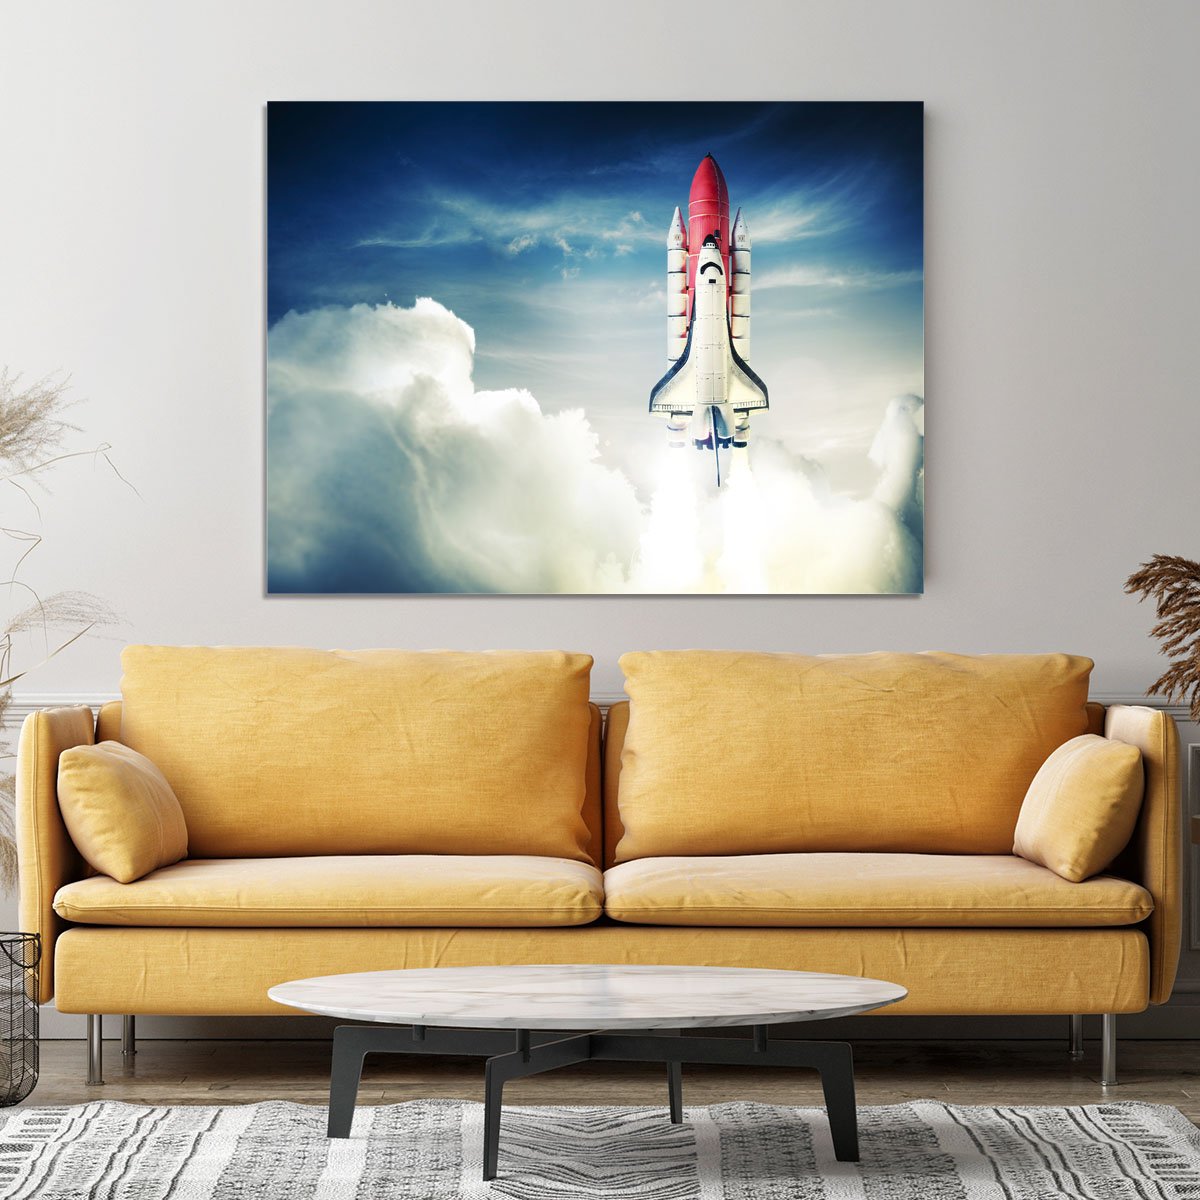 Space shuttle taking off on a mission Canvas Print or Poster